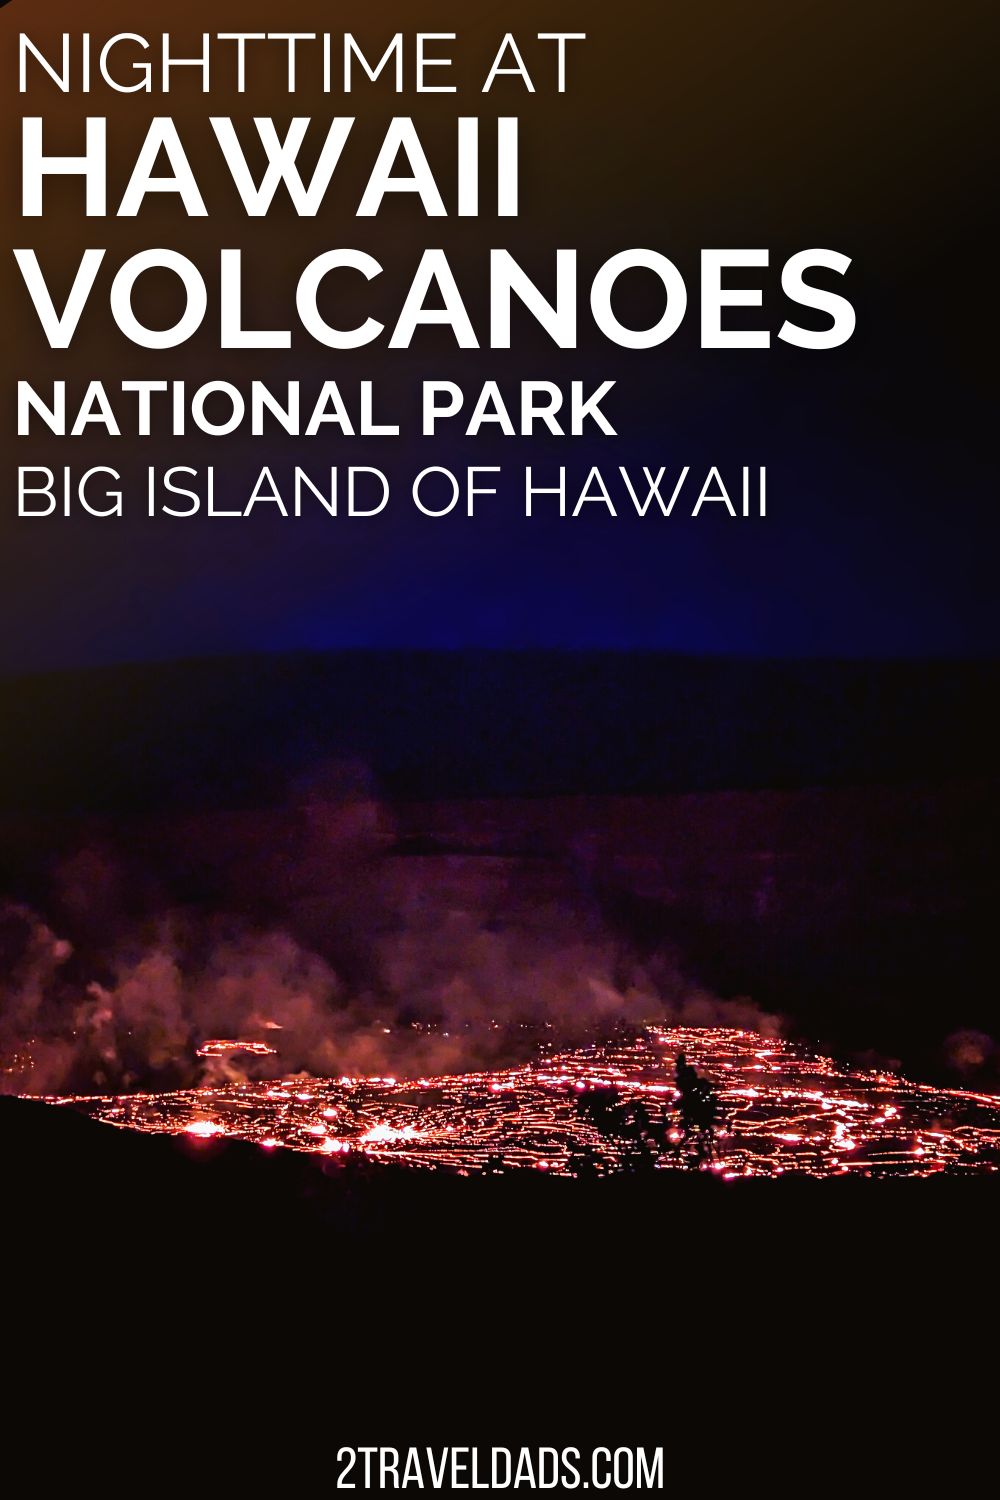 Visiting Hawaii Volcanoes National Park at night for the Kīlauea lava glow is awesome. Everything you need to know to plan a nighttime trip into the park, including where to see flowing Hawaii lava, how to photograph lava glow and more.